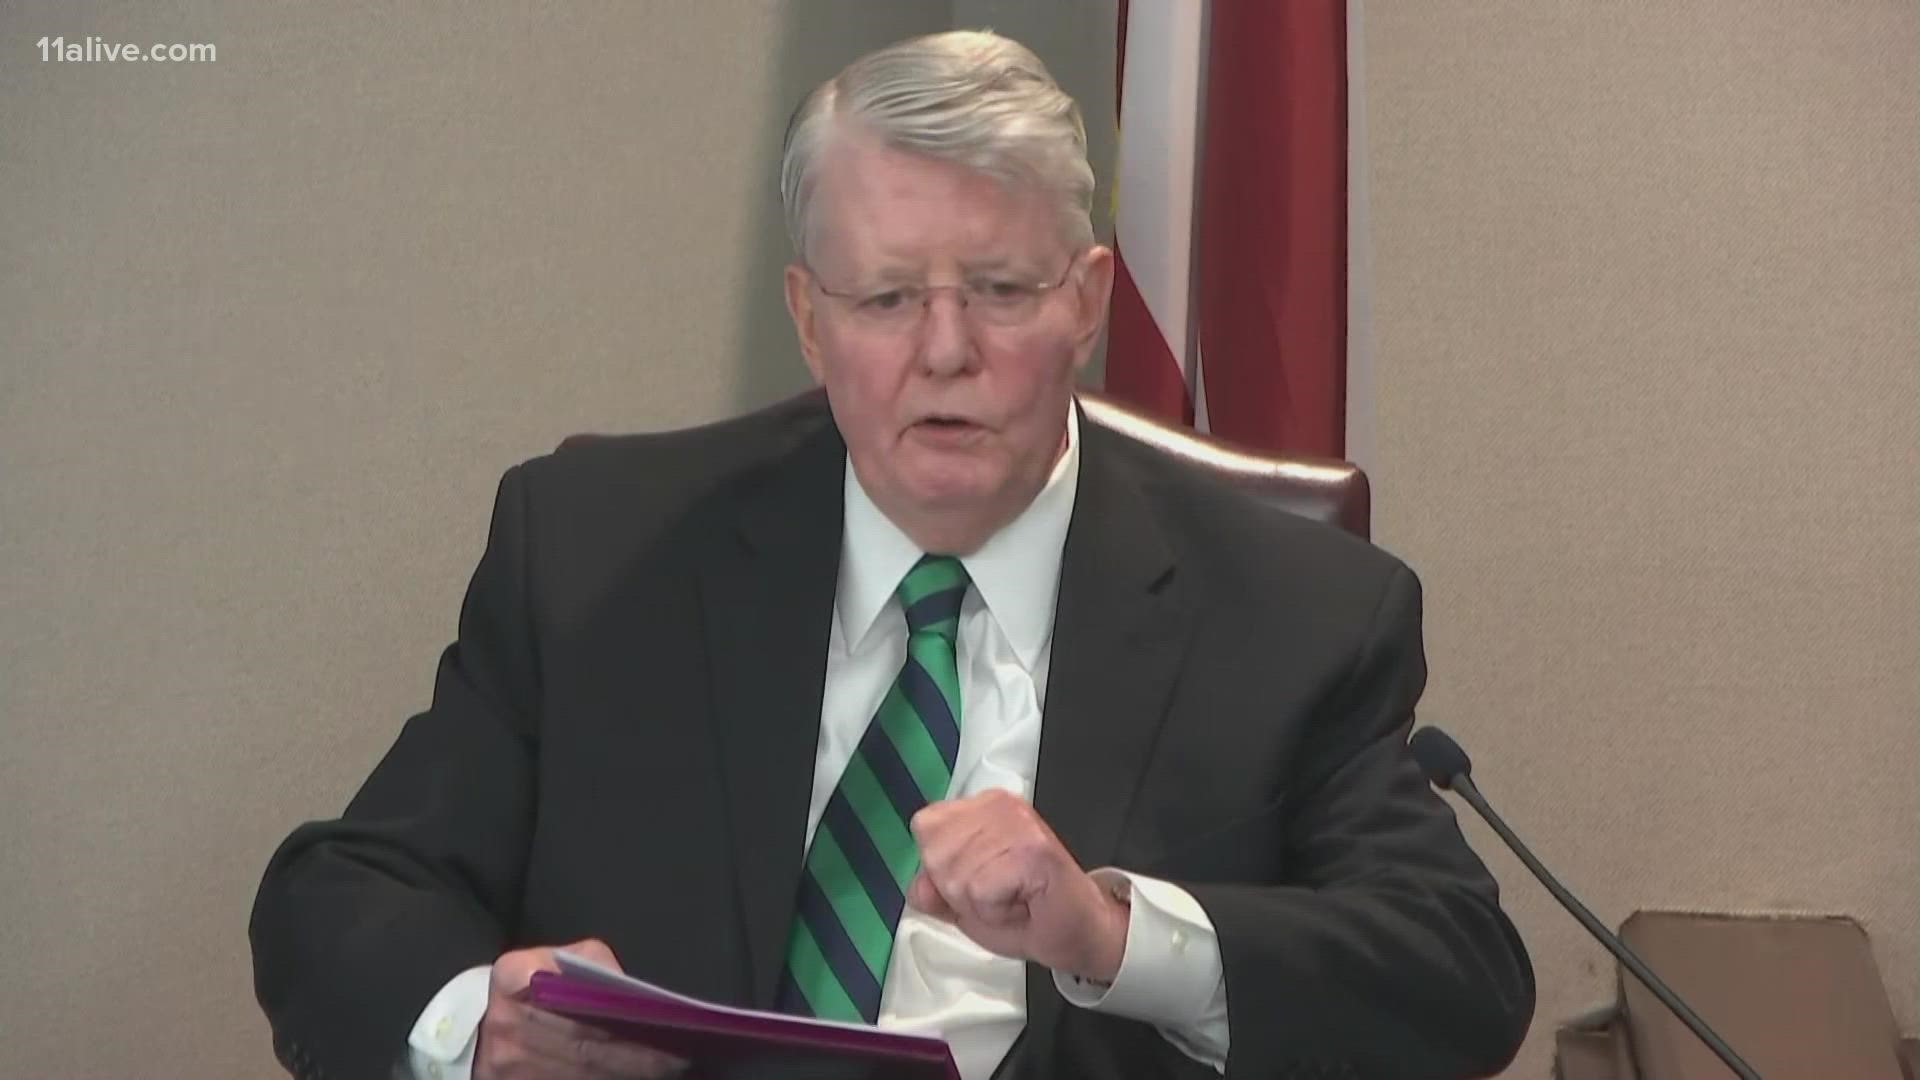 On Nov. 16, the state called its first witness of the day, Dr. Edmond R. Donoghue,   medical examiner, to the stand. Donoghue performed Arbery's autopsy.